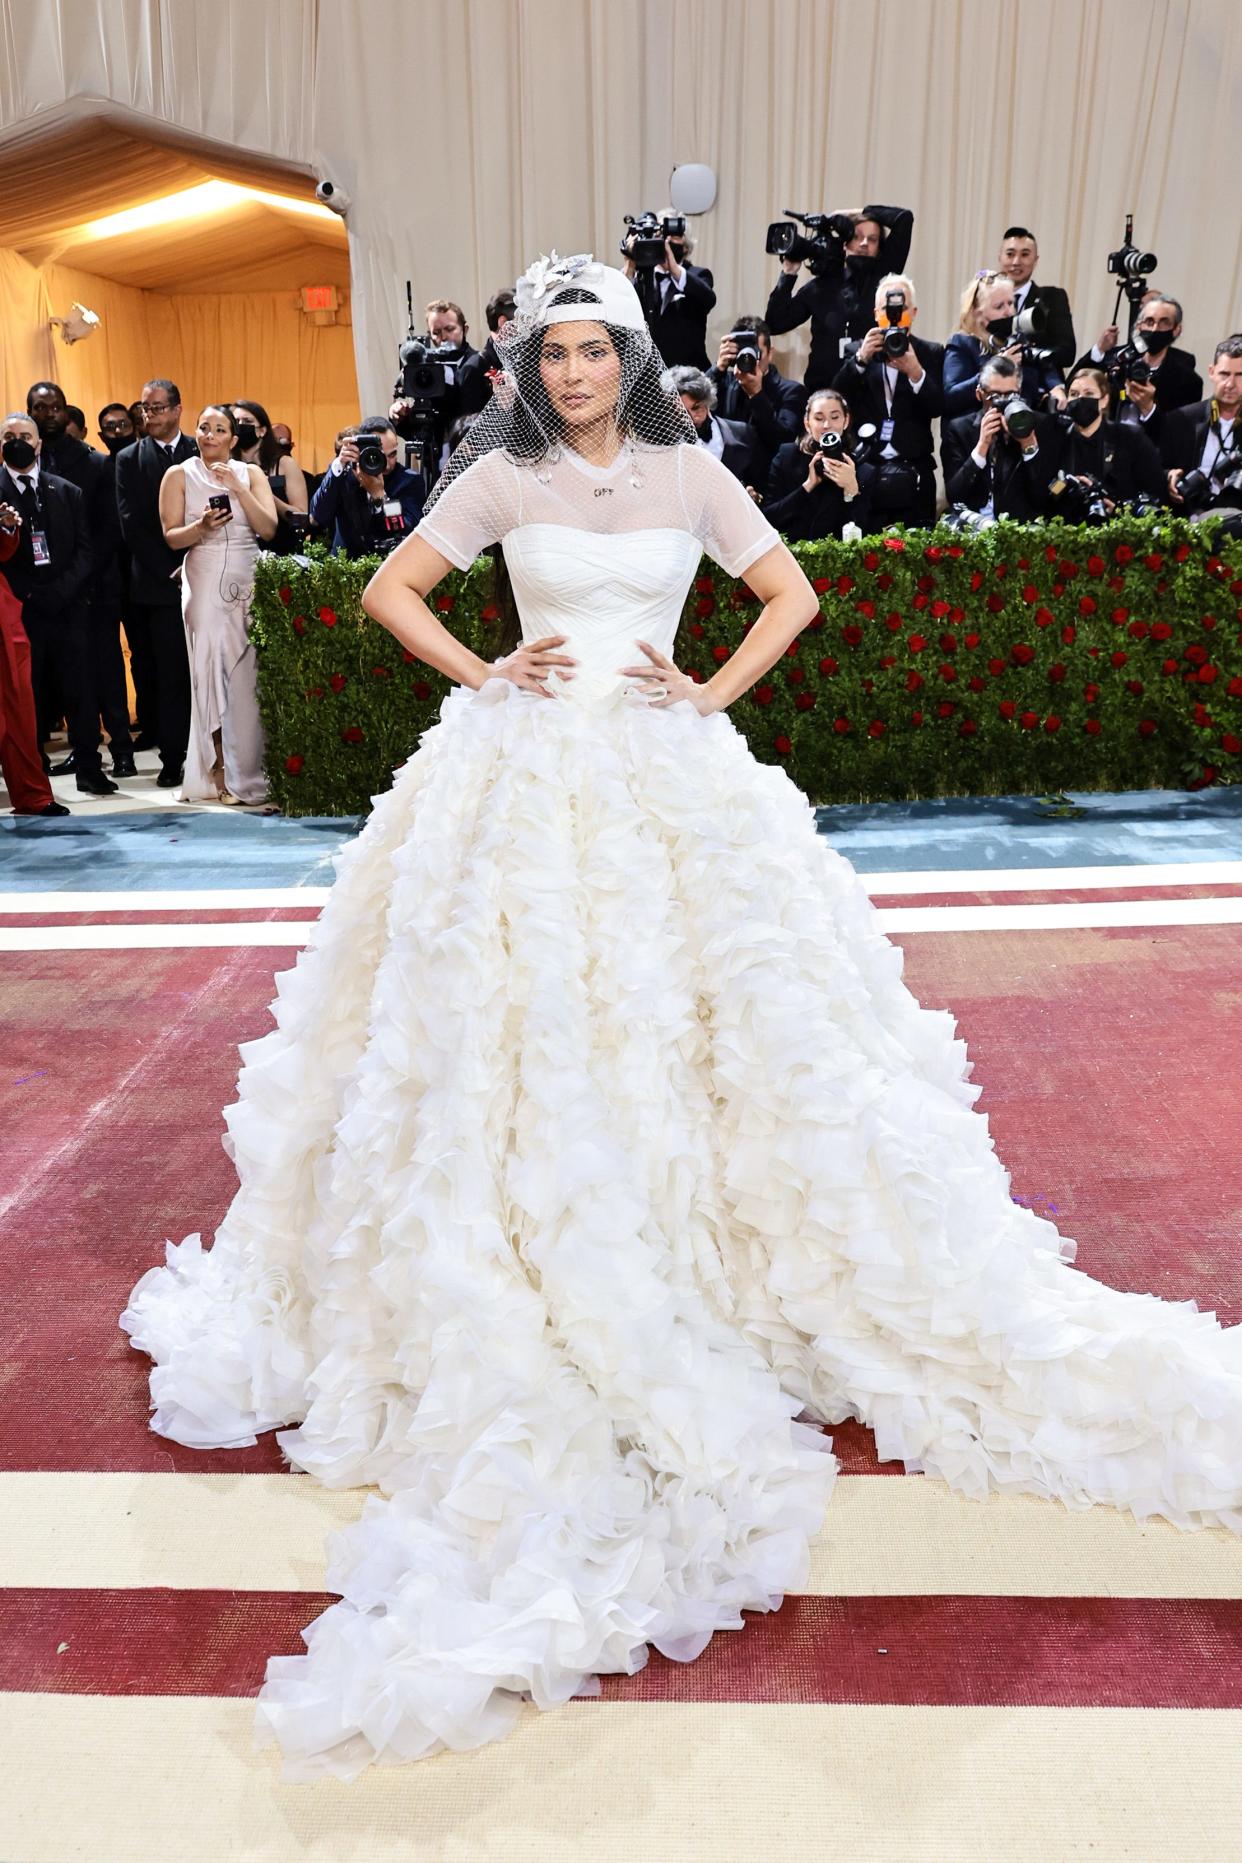 Kylie Jenner attends The 2022 Met Gala Celebrating "In America: An Anthology of Fashion" at The Metropolitan Museum of Art on May 02, 2022